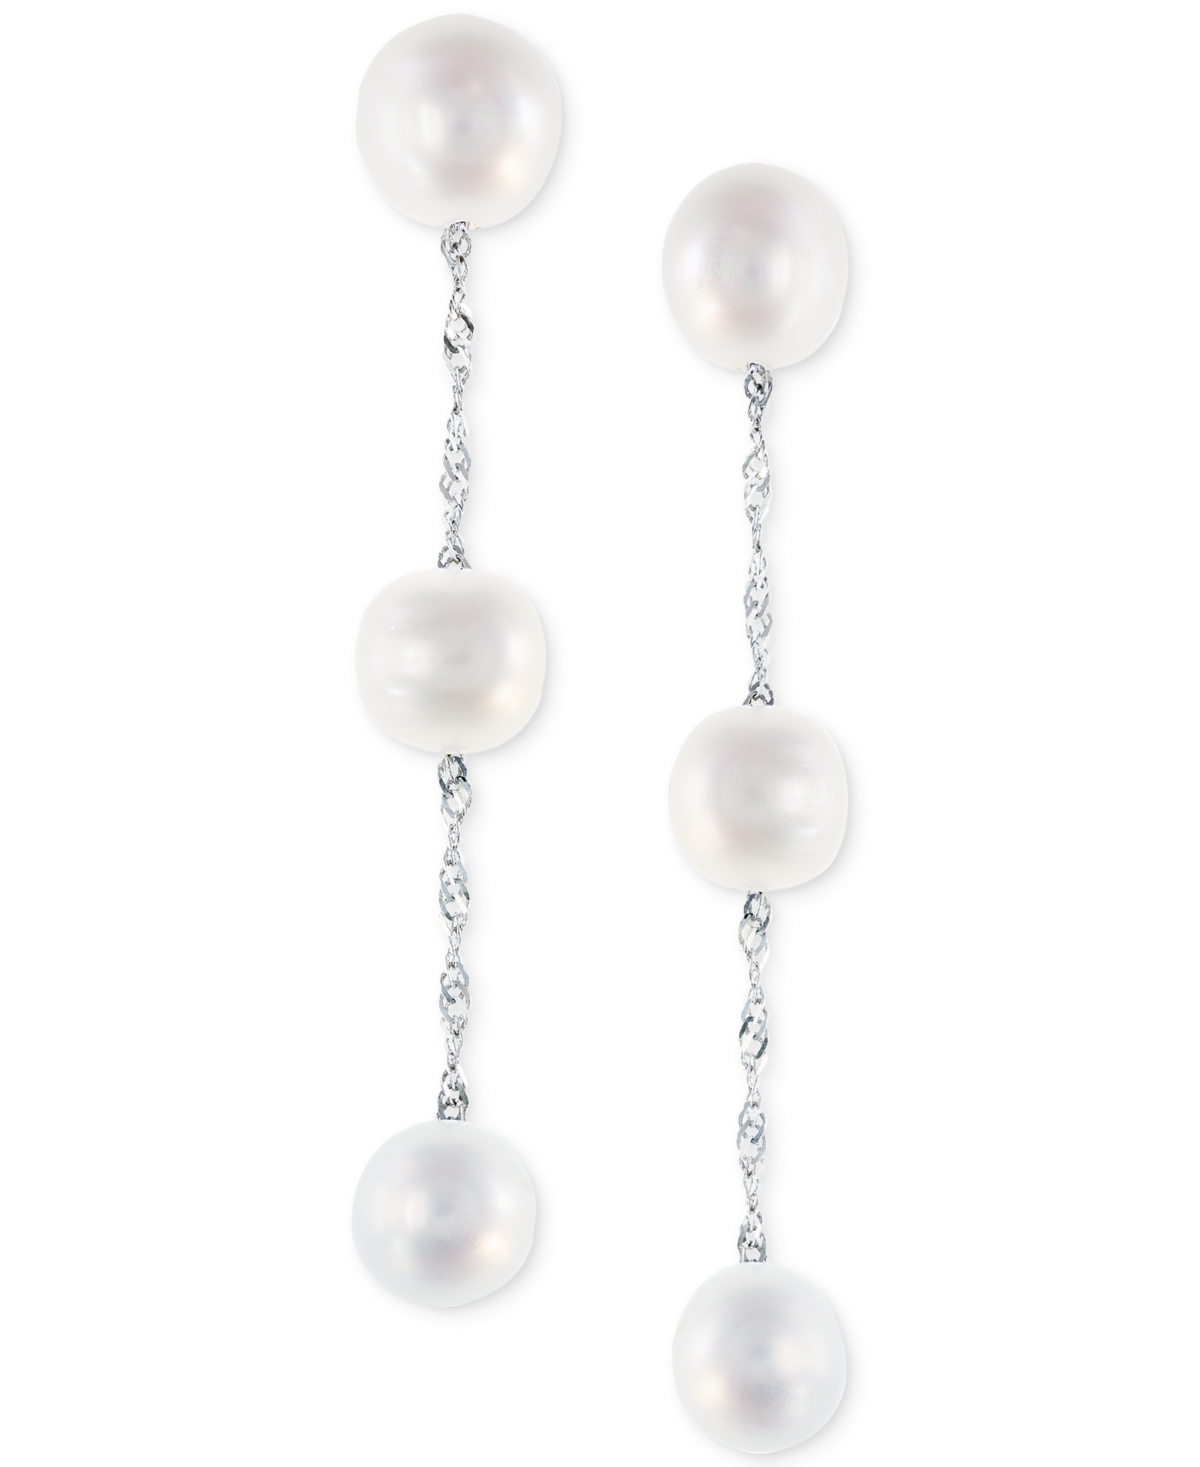 Effy Collection Effy Cultured Freshwater Pearl Triple Drop Earrings in 14k Yellow, White or Rose Gold (5mm)